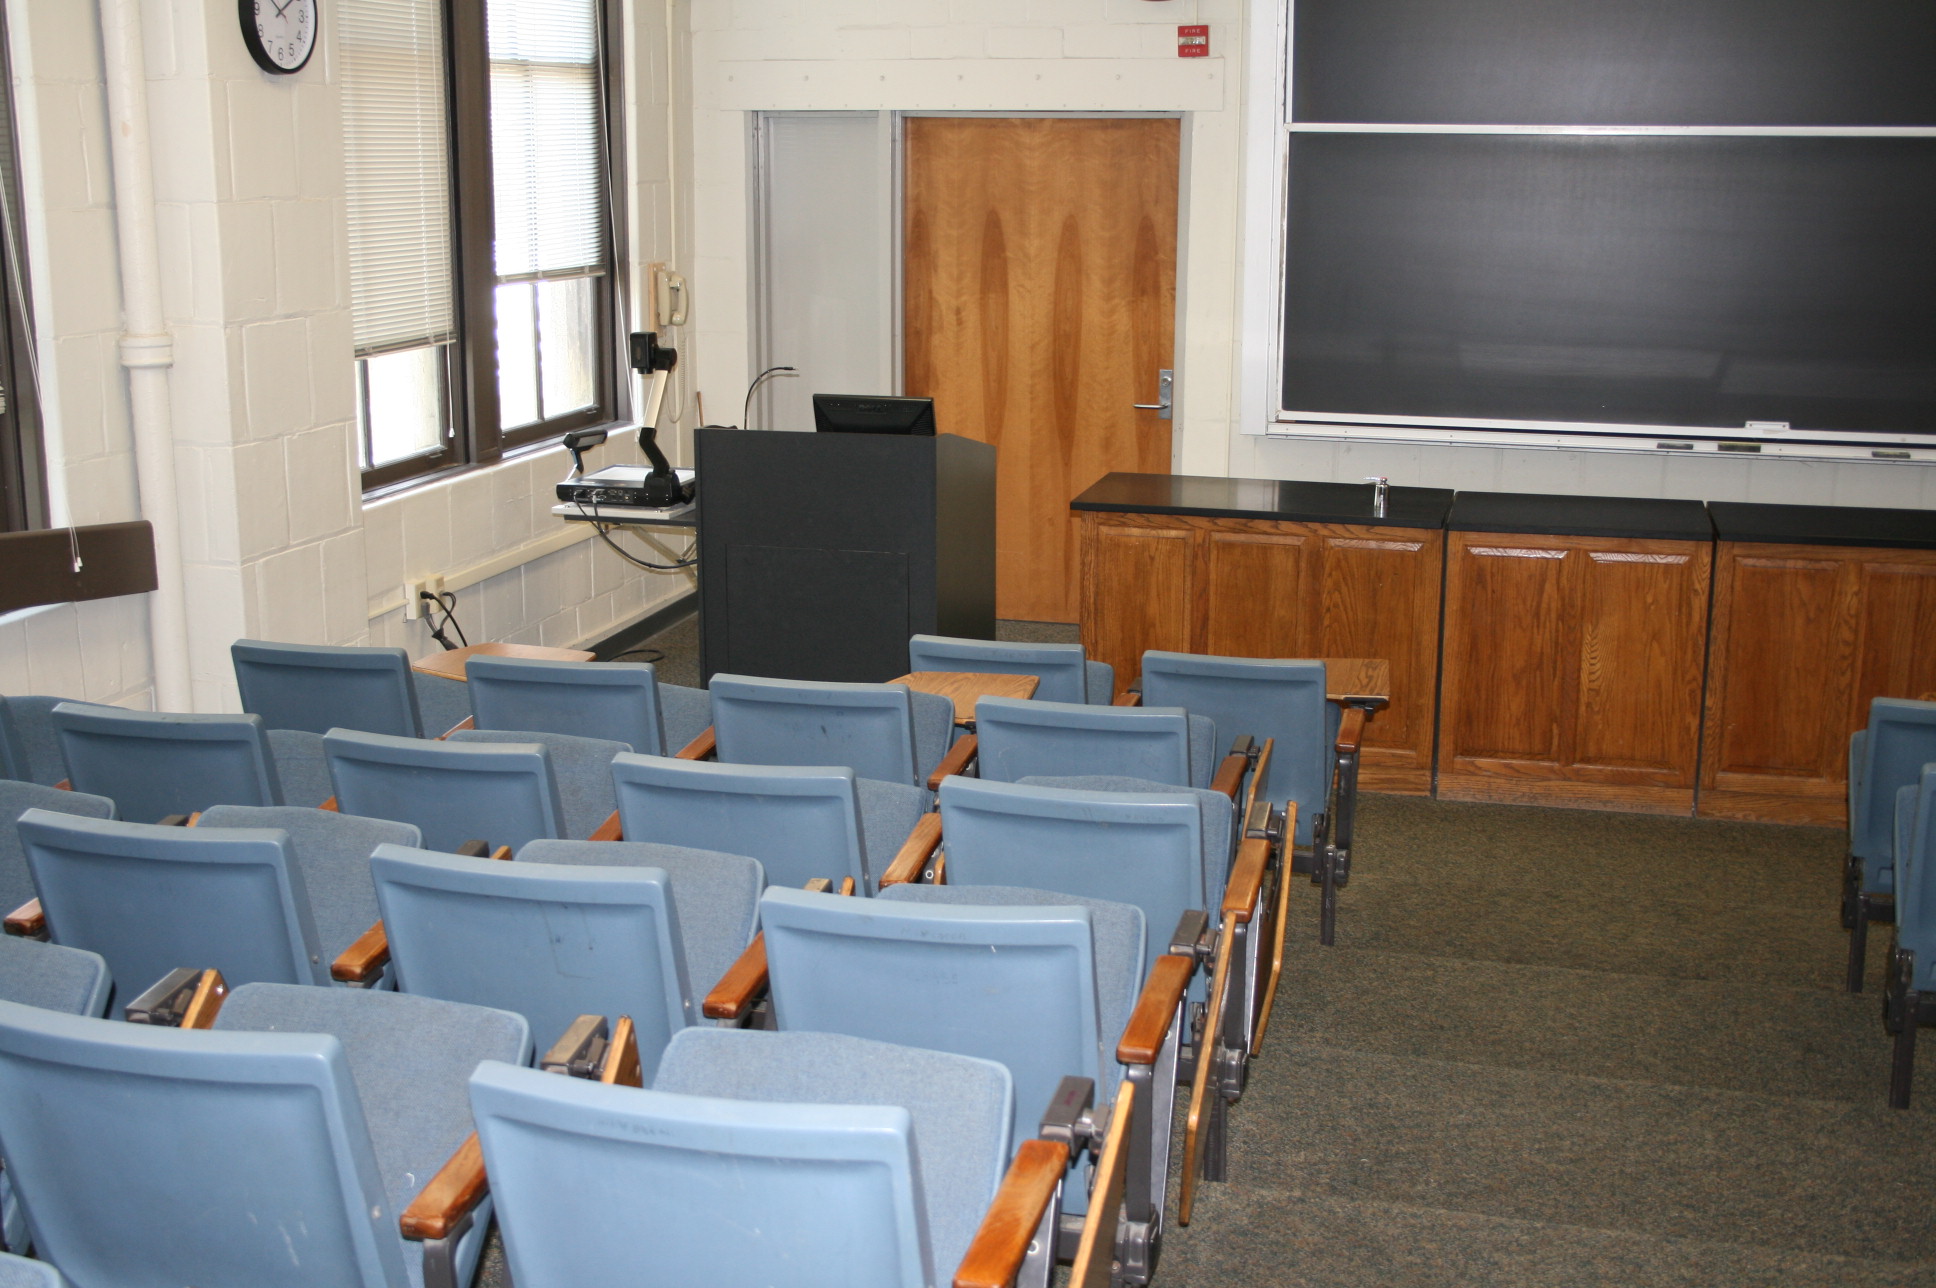 An image of Nicholson 109 taken from the back of the classroom